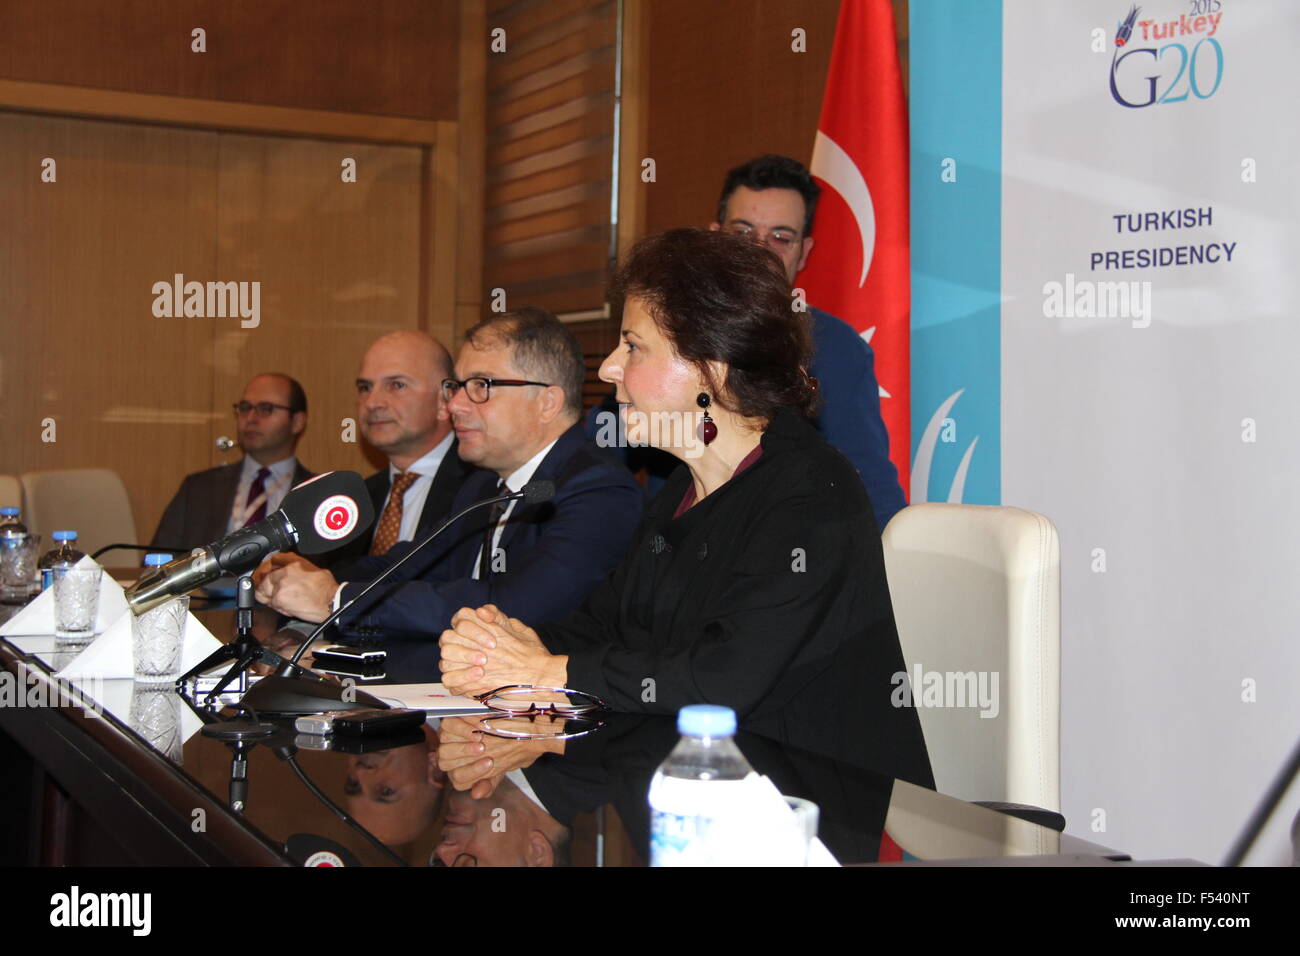 Ankara. 27th Oct, 2015. Turkish Foreign Ministry deputy undersecretary Ayse Sinirlioglu (1st R) speaks during a press conference in the Turkish capital of Ankara, Oct. 27, 2015. The G20 summit that Turkey will host in November will discuss the crisis of migration amid high influx of Syrian refugees fleeing their war-torn country, a Turkish Foreign Ministry official said on Tuesday. © Zheng Jinfa/Xinhua/Alamy Live News Stock Photo